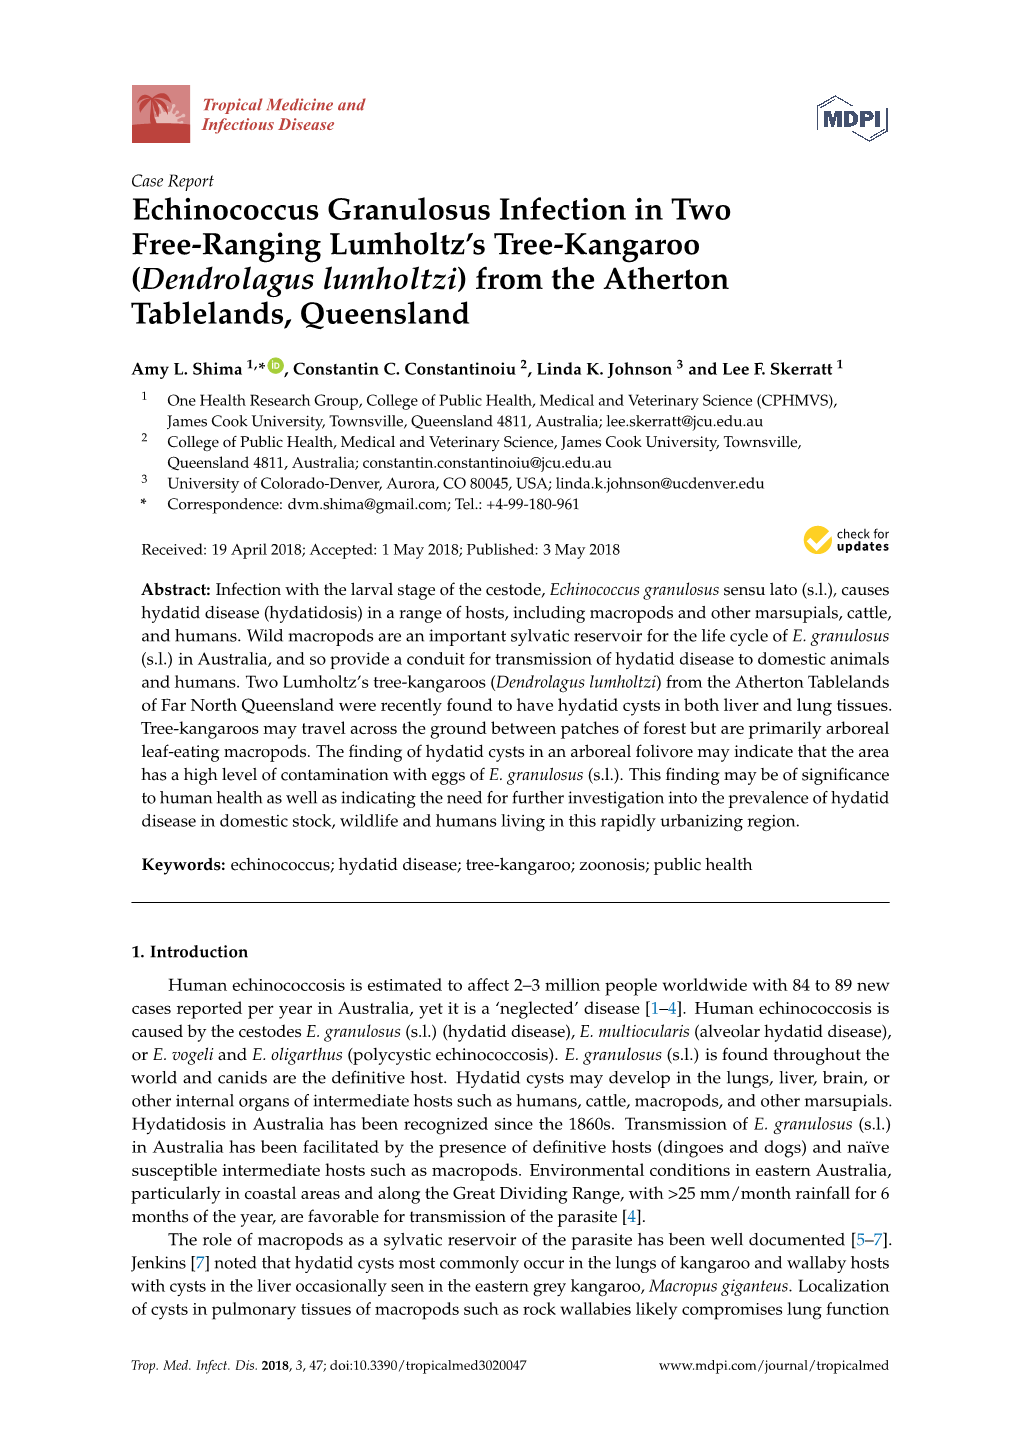 Echinococcus Granulosus Infection in Two Free-Ranging Lumholtz's Tree